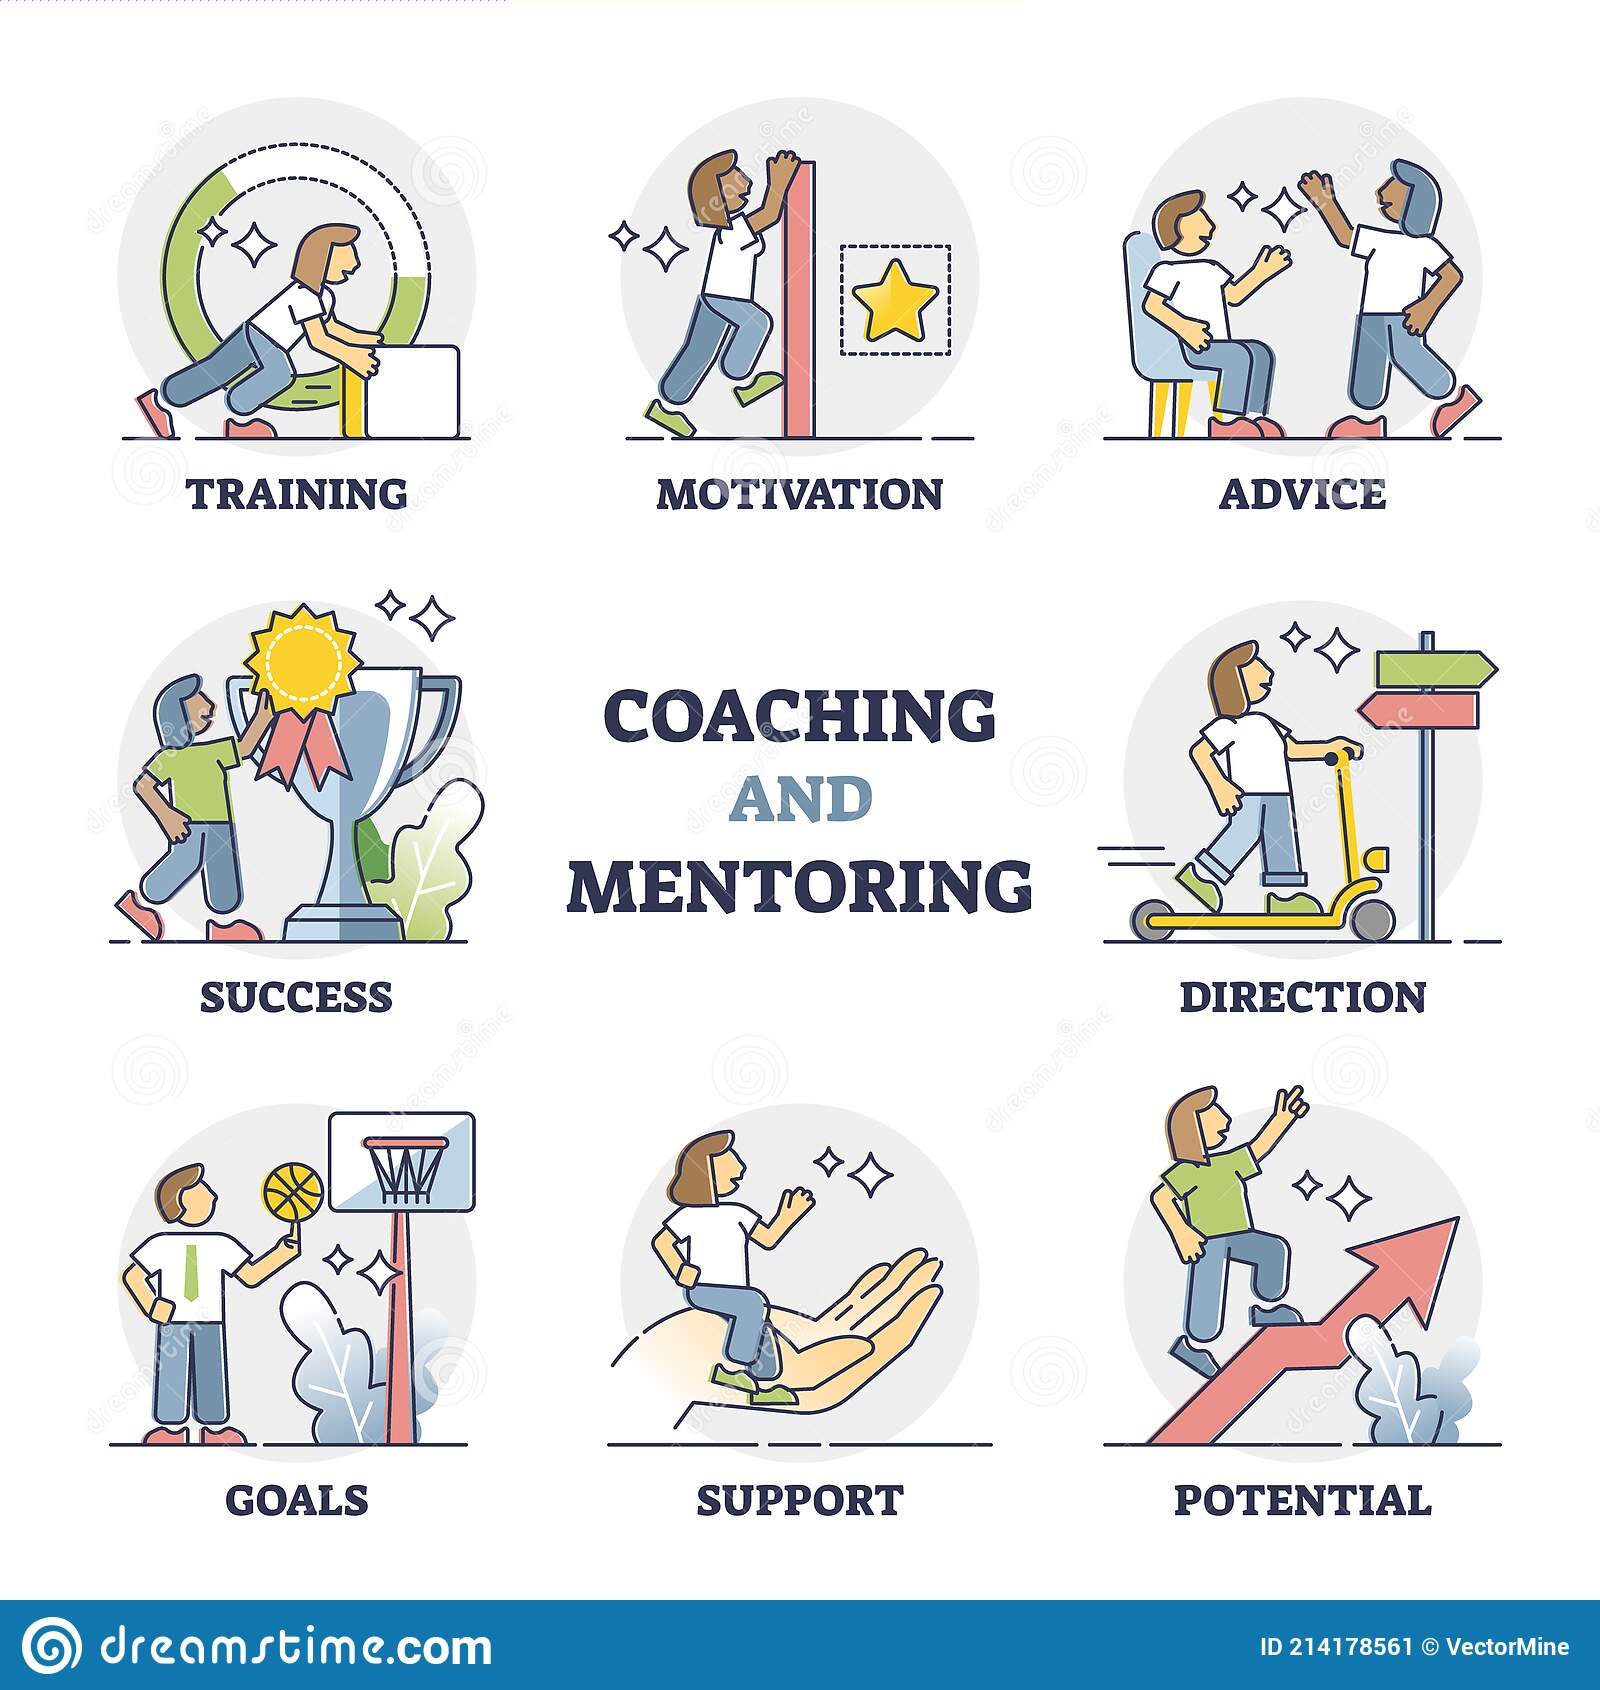 WORKSHOP ON COACHING, MENTORING AND CAREER DEVELOPMENT FOR SUCCESS, Istanbul, İstanbul, Turkey